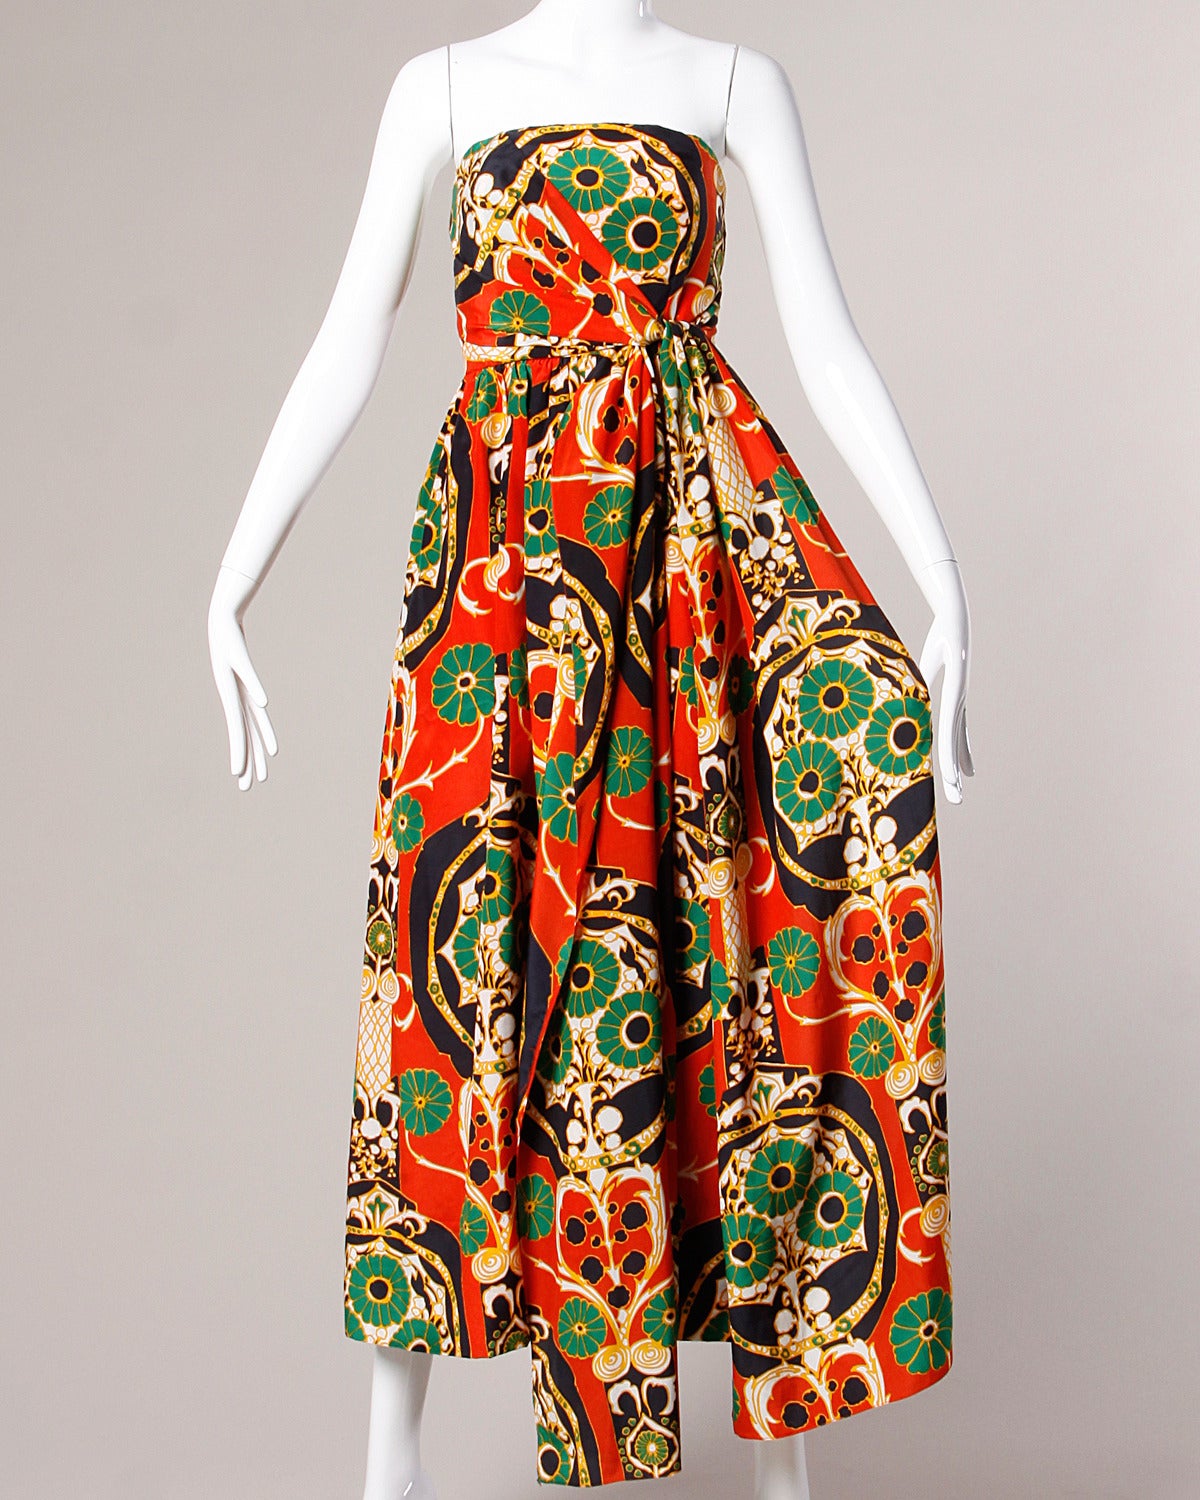 Reduced from $1895. Stunning vintage two-piece ensemble by Donald Brooks featuring a strapless wrap-style gown and matching capelet. Both pieces are done in a vibrant Asian-inspired printed creamy silk and can be worn separately as well as together